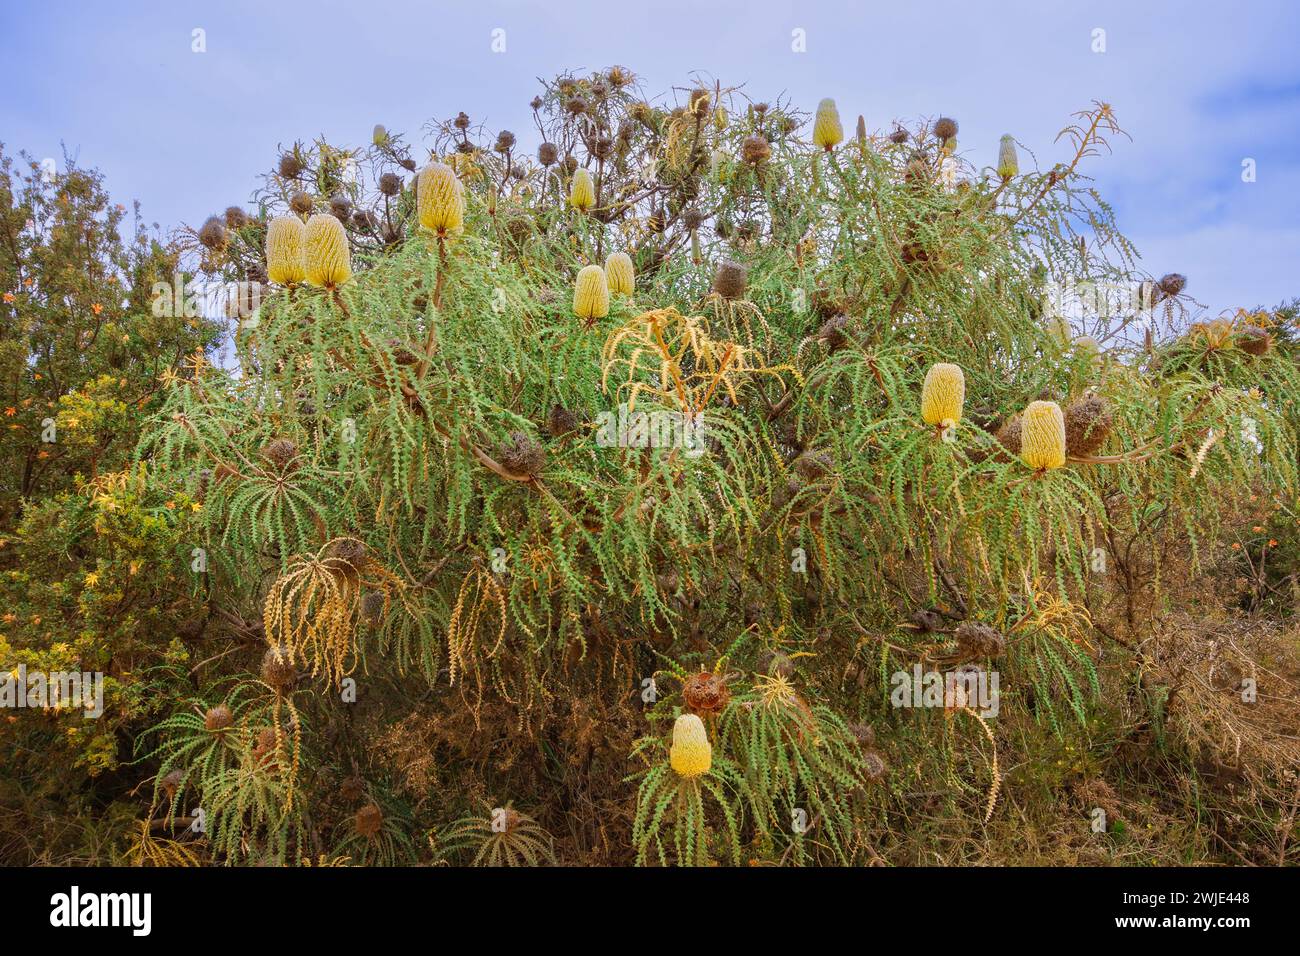 Showy banksia shrub (Banksia speciosa) with several flowers in natural habitat, Western Australia Stock Photo